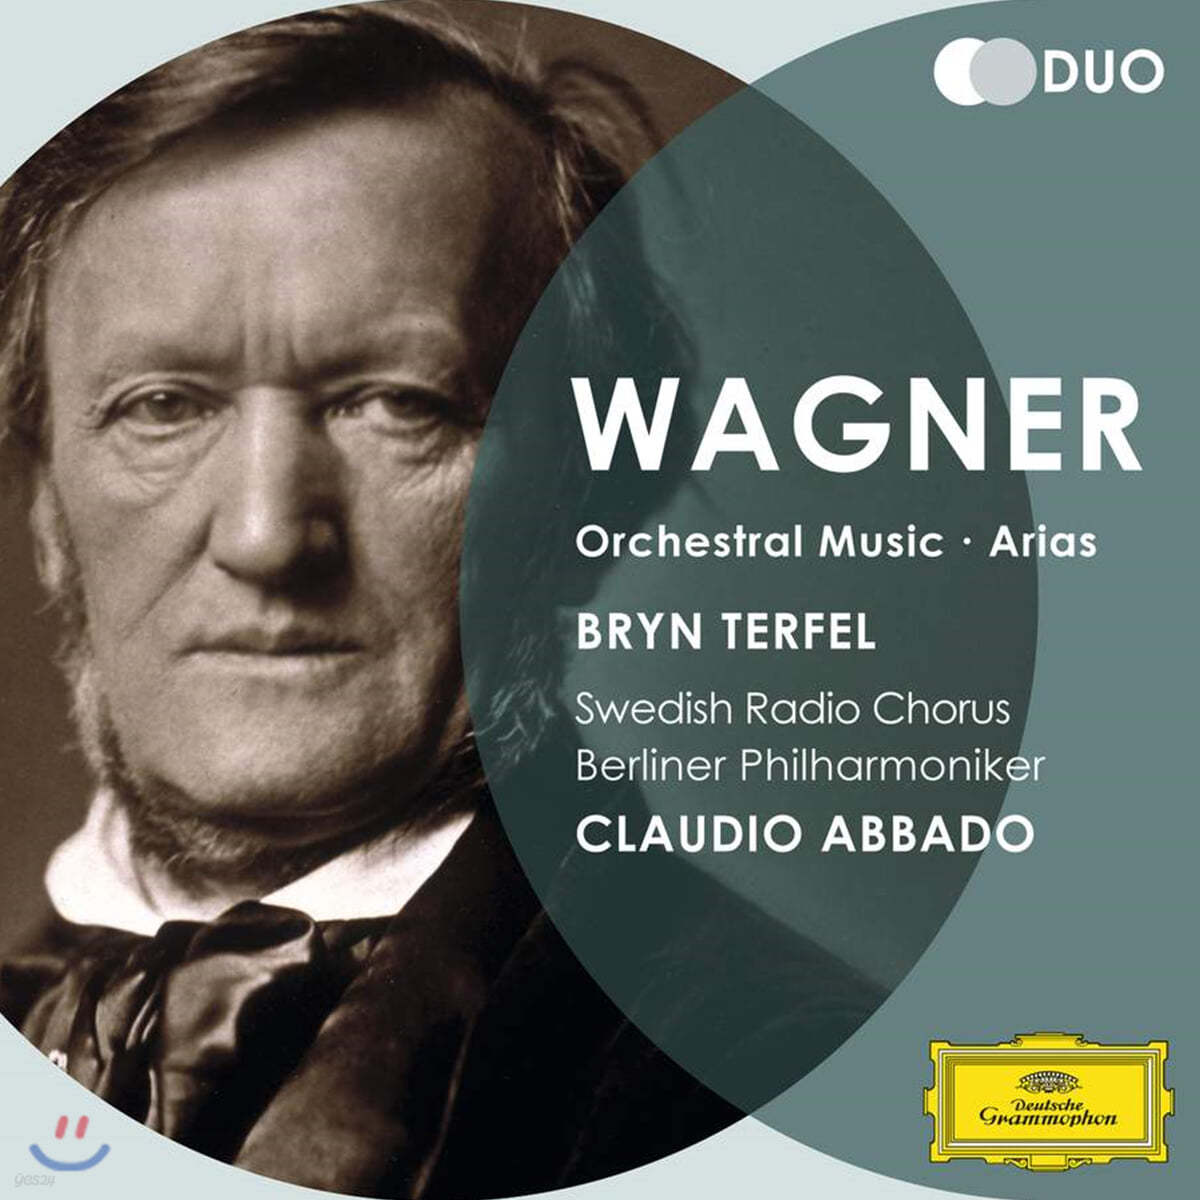 Claudio Abbado 바그너: 관현악곡과 아리아 (Wagner: Orchestral Music and Arias)